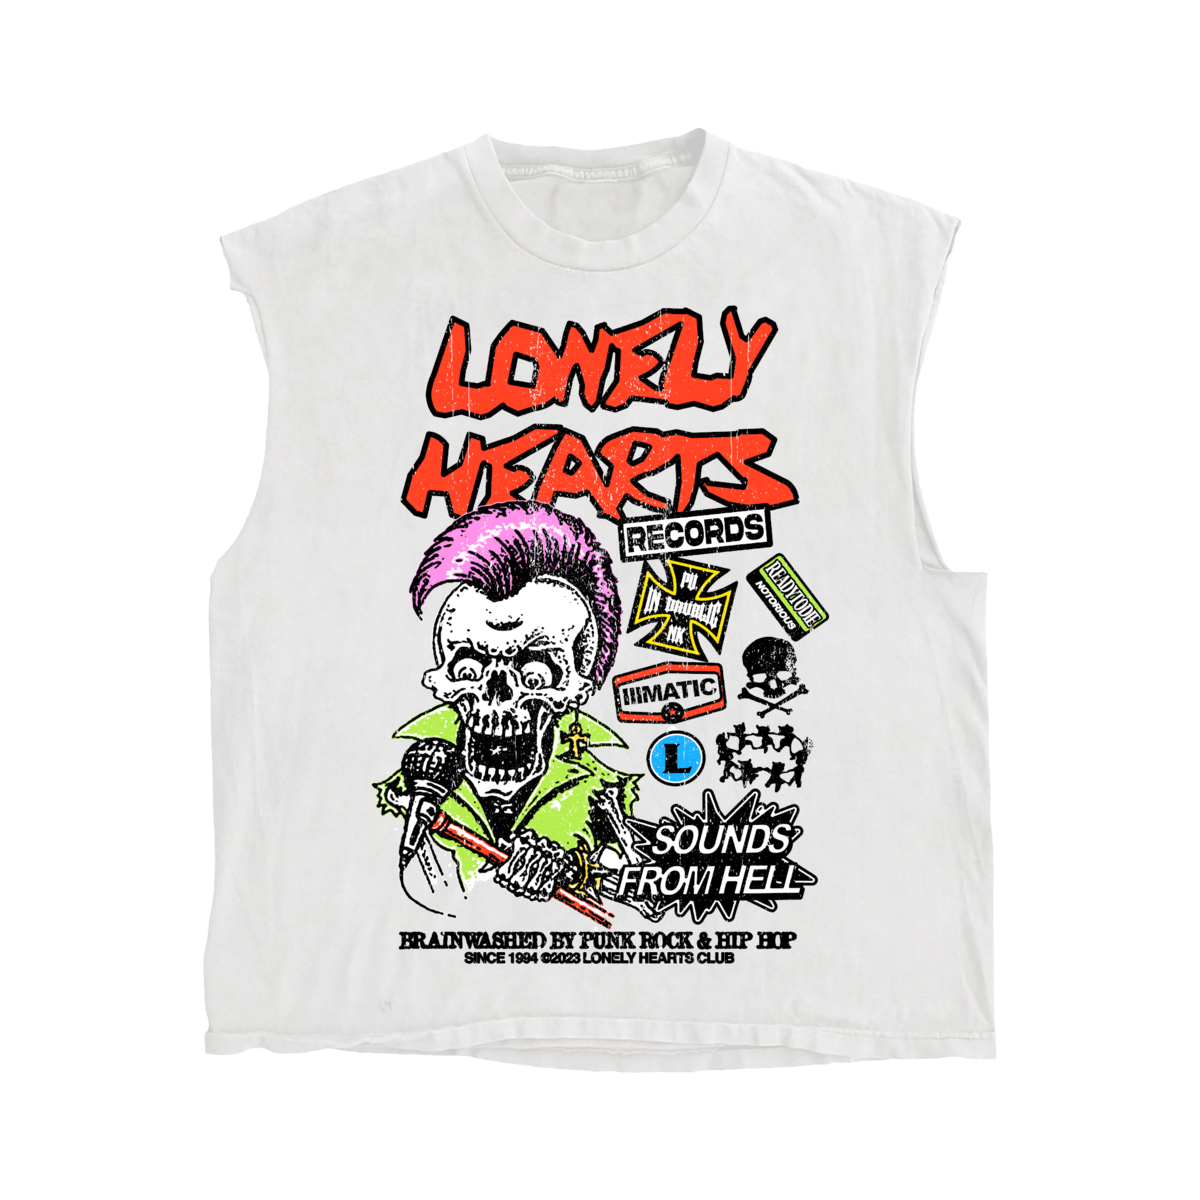 Lonely Hearts Club "LHC Records" Sleeveless T-Shirt